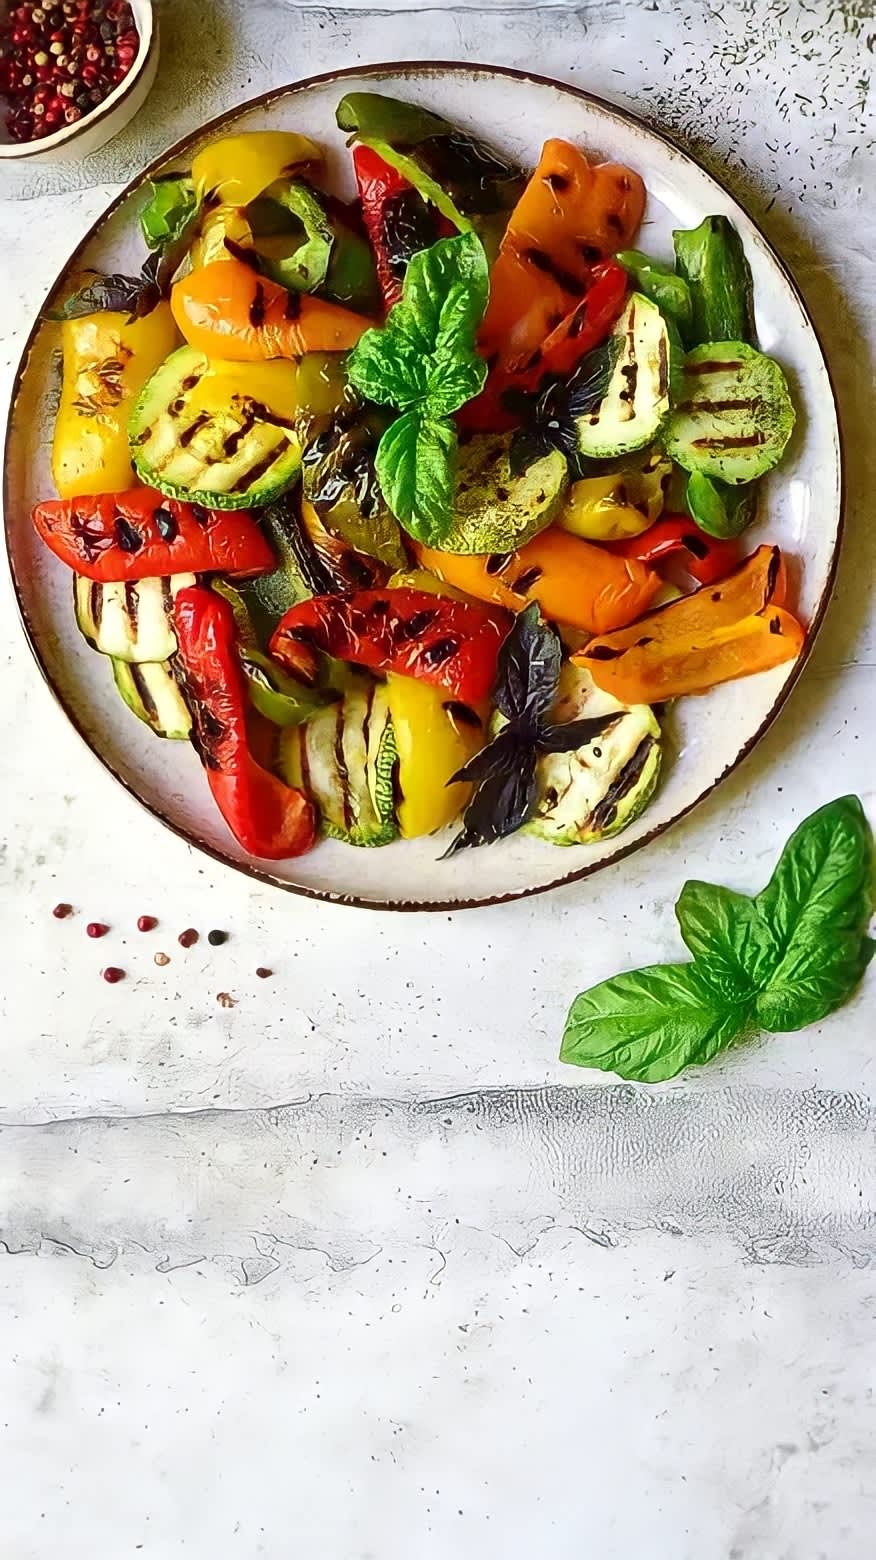 Grilled vegetables on a plate with green garnish and spices on the side